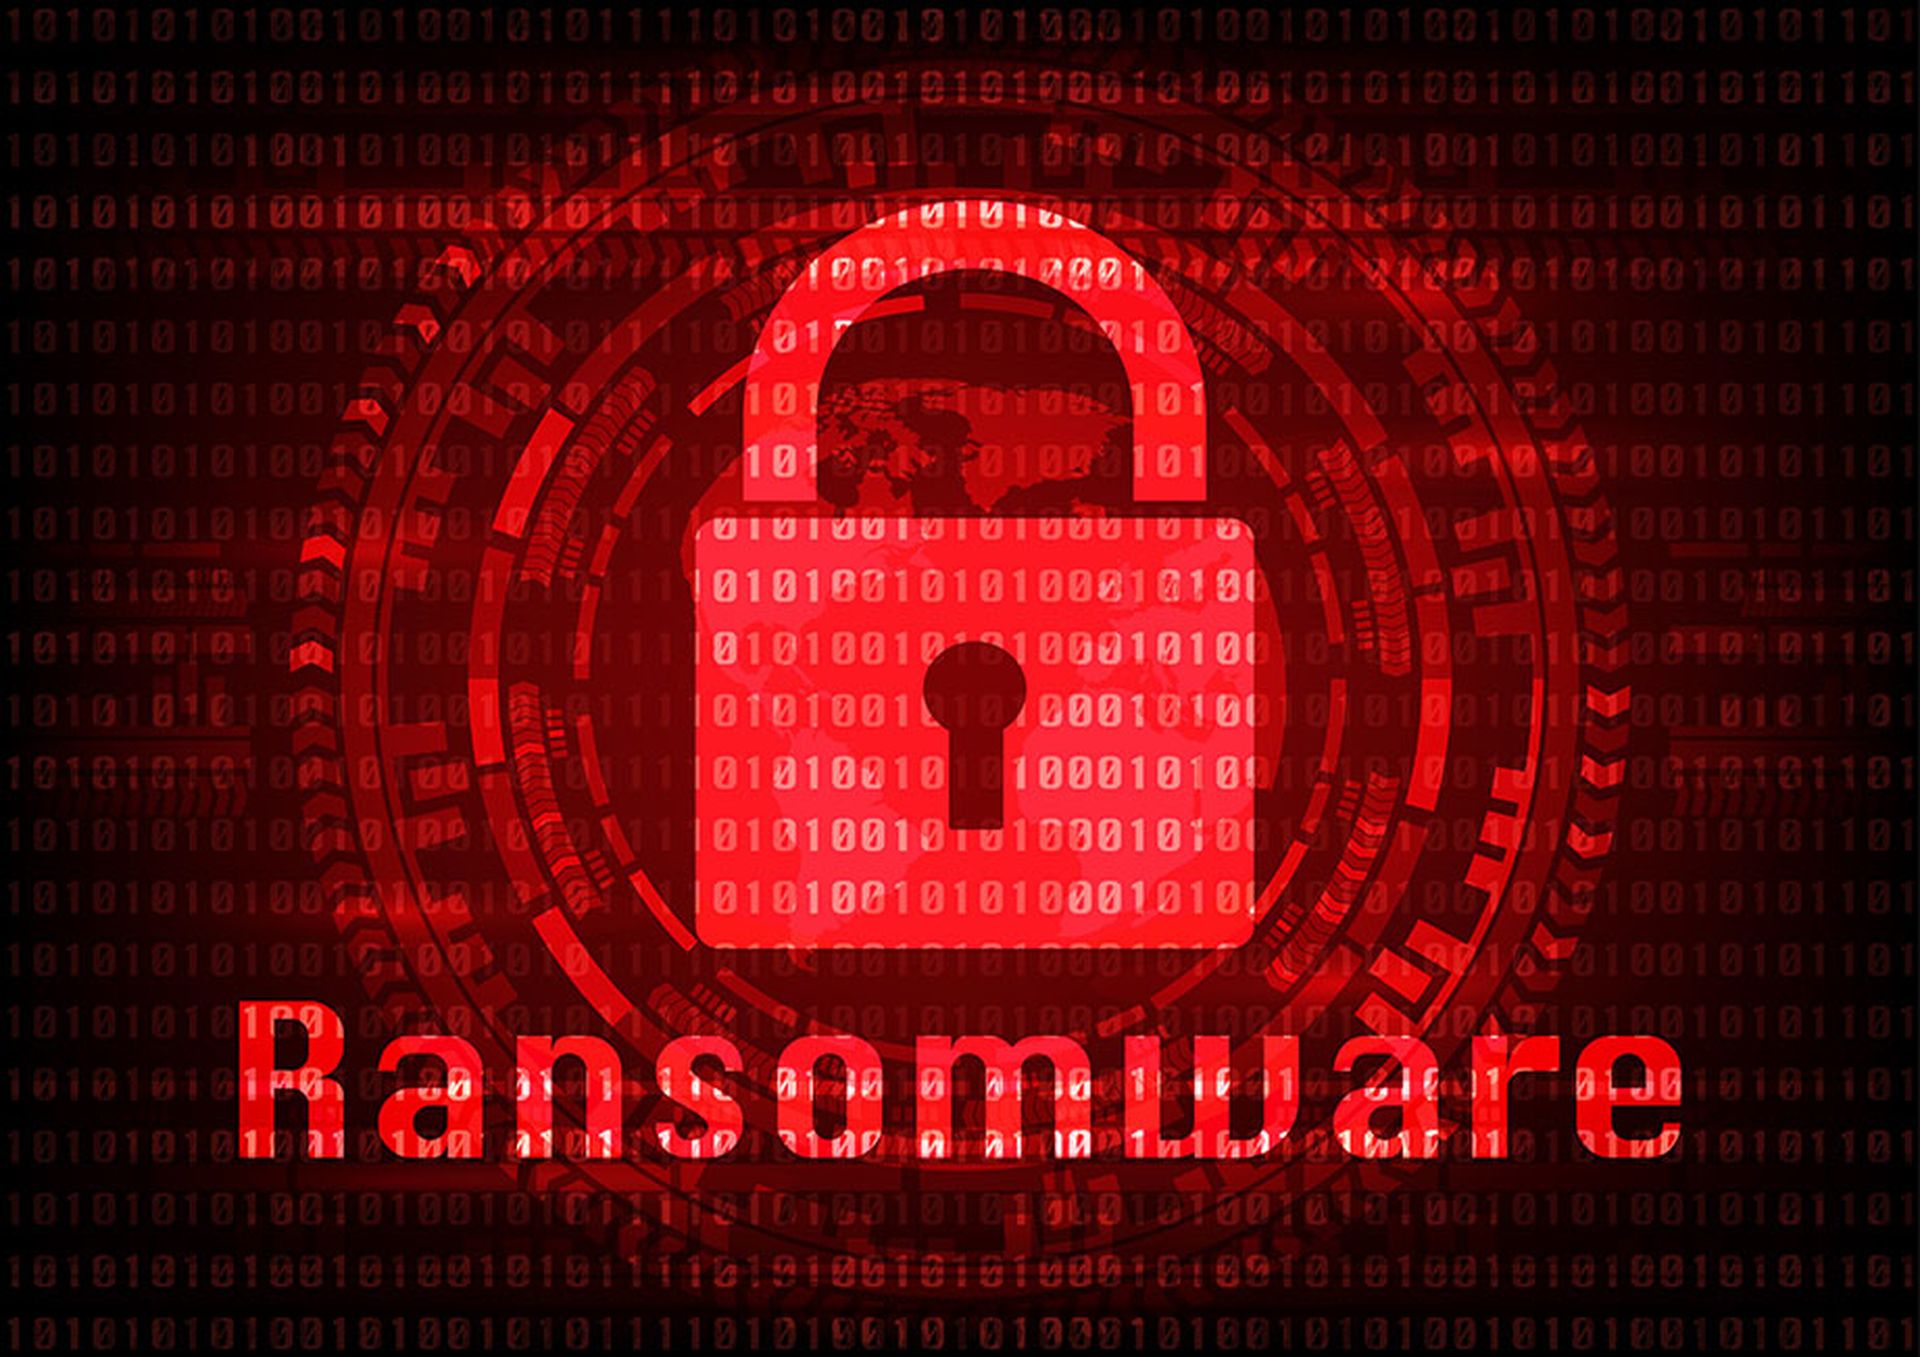 Abstract Malware Ransomware virus encrypted files with key on binary bit background.